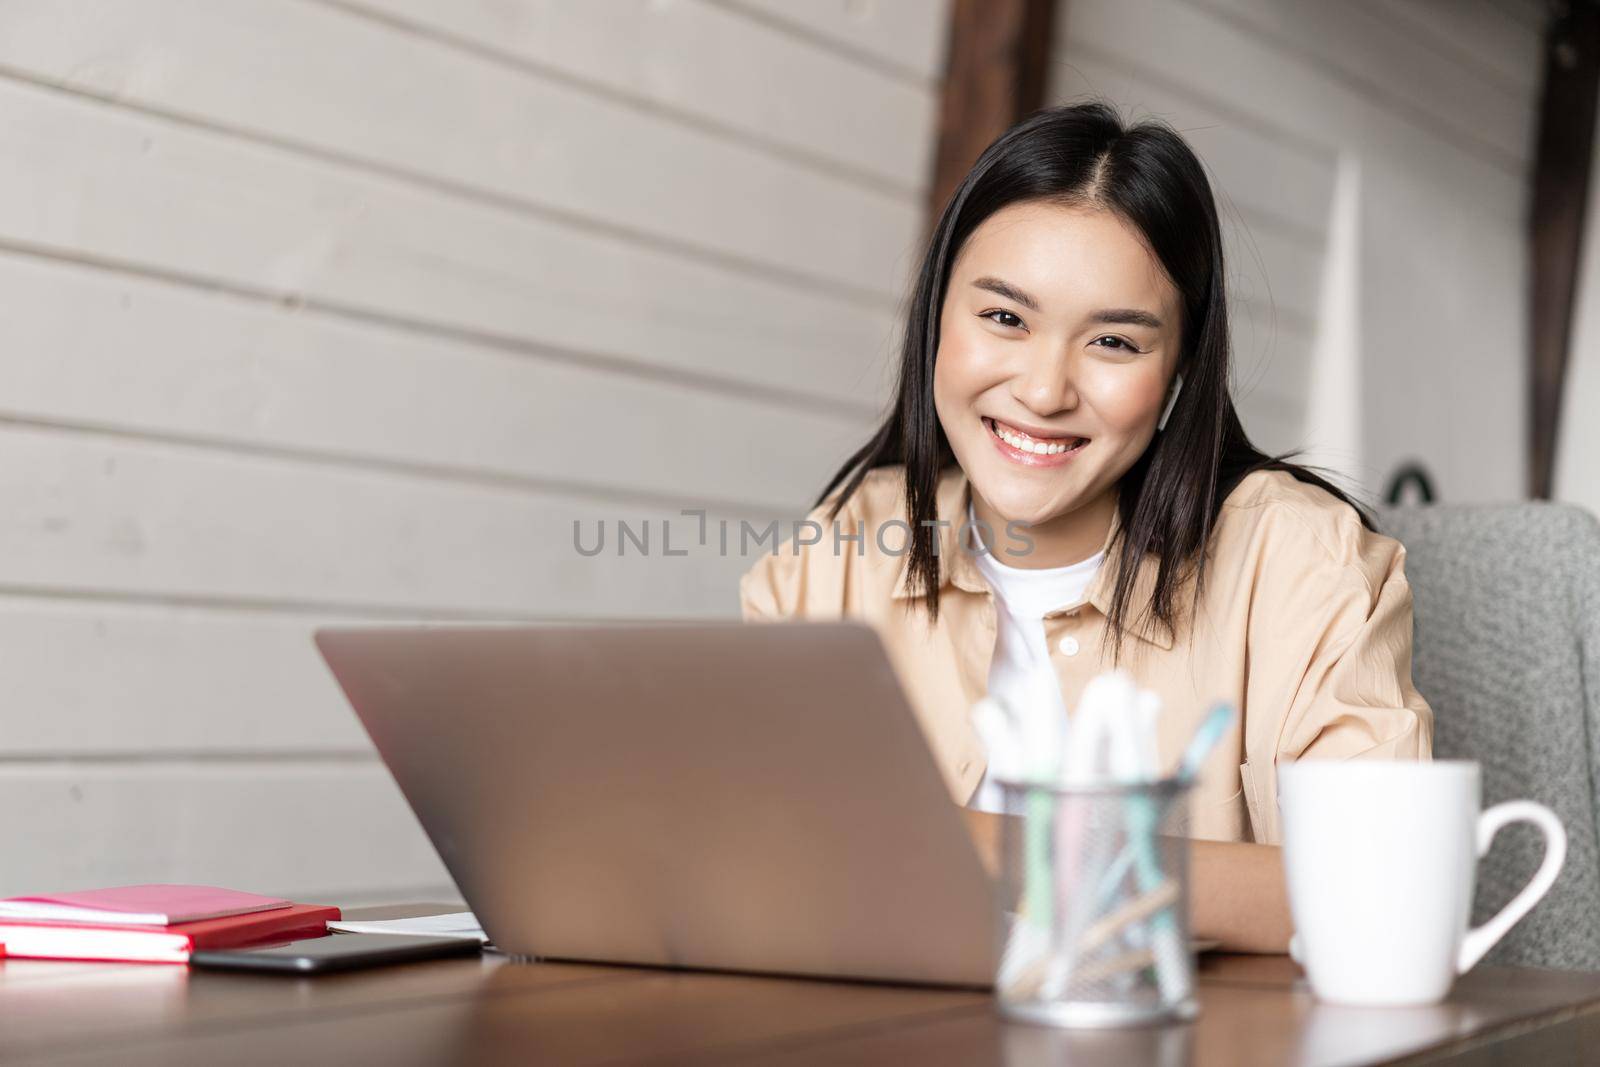 Smiling korean girl works from home, woman freelancer working on laptop, studying or doing homework on computer.